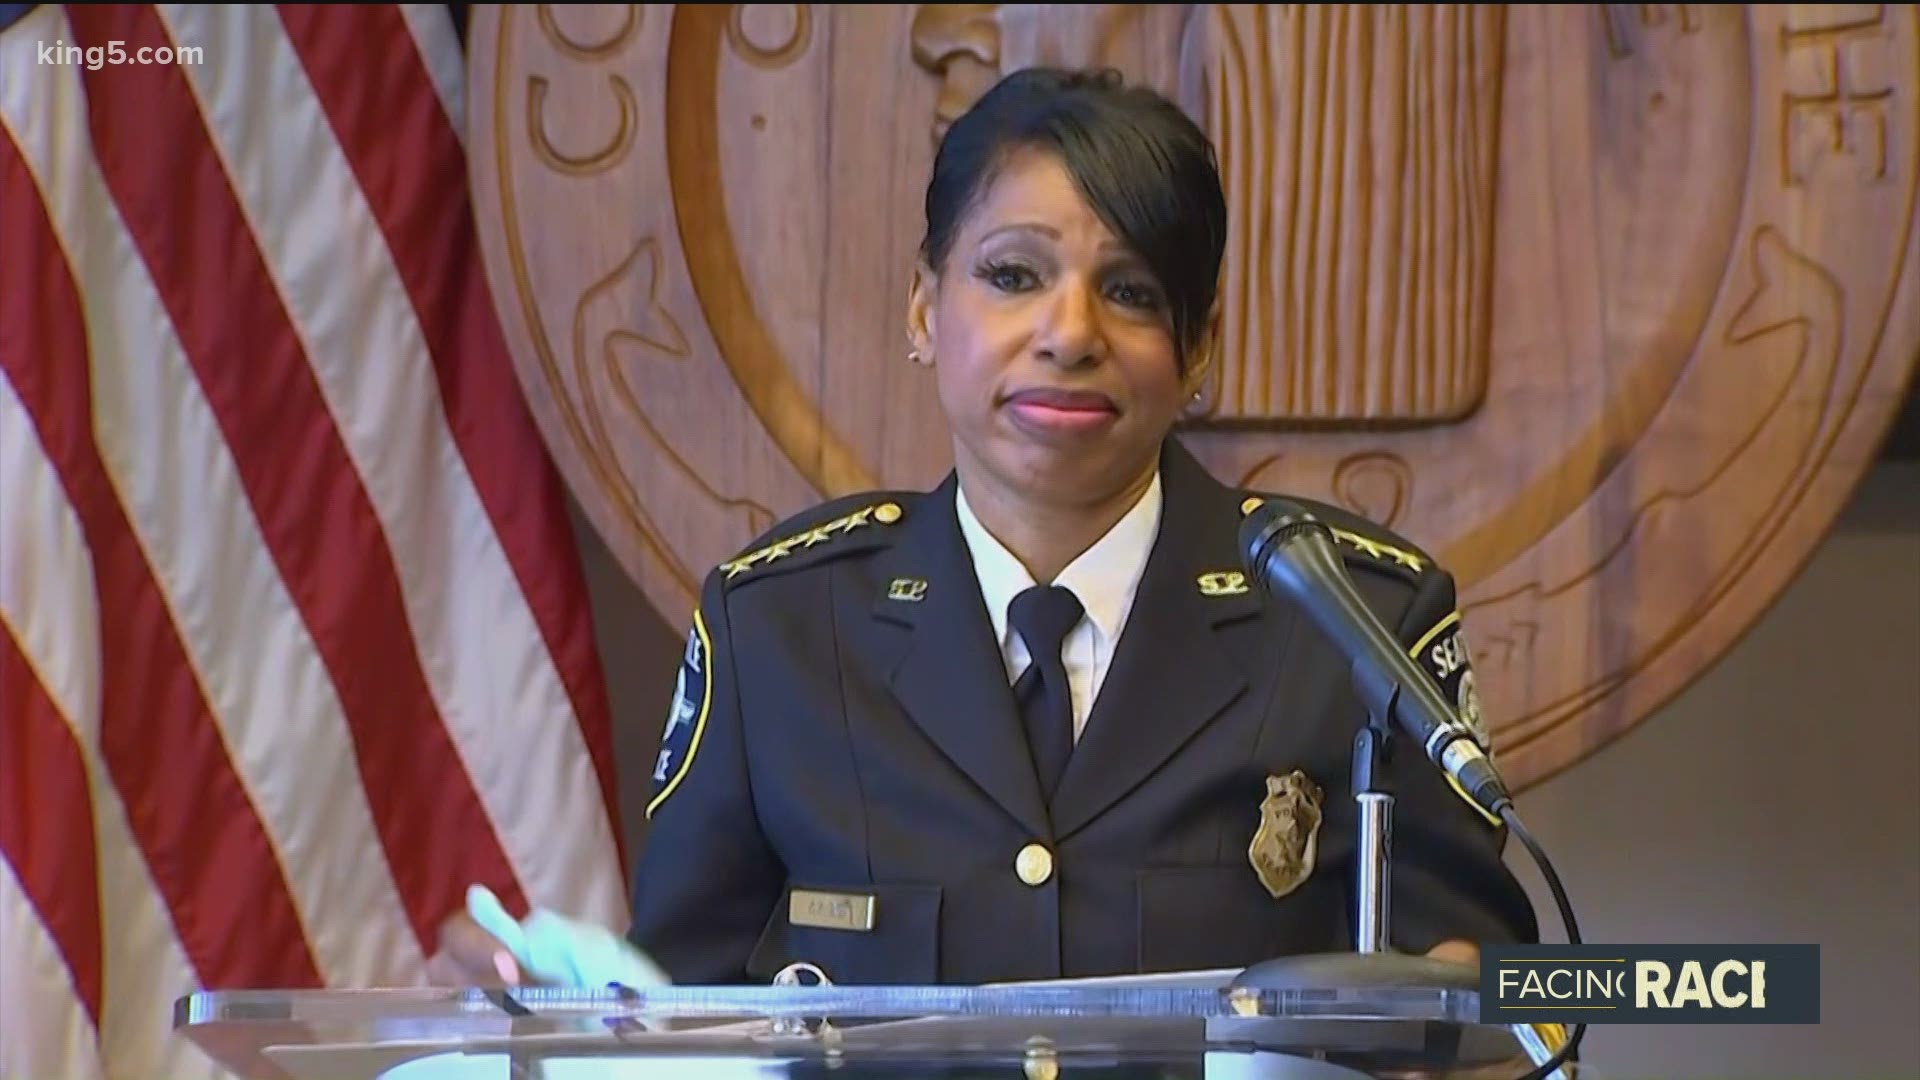 Former Seattle Police Chief Carmen Best opens up about her departure from the department and shares her vision for racial justice.